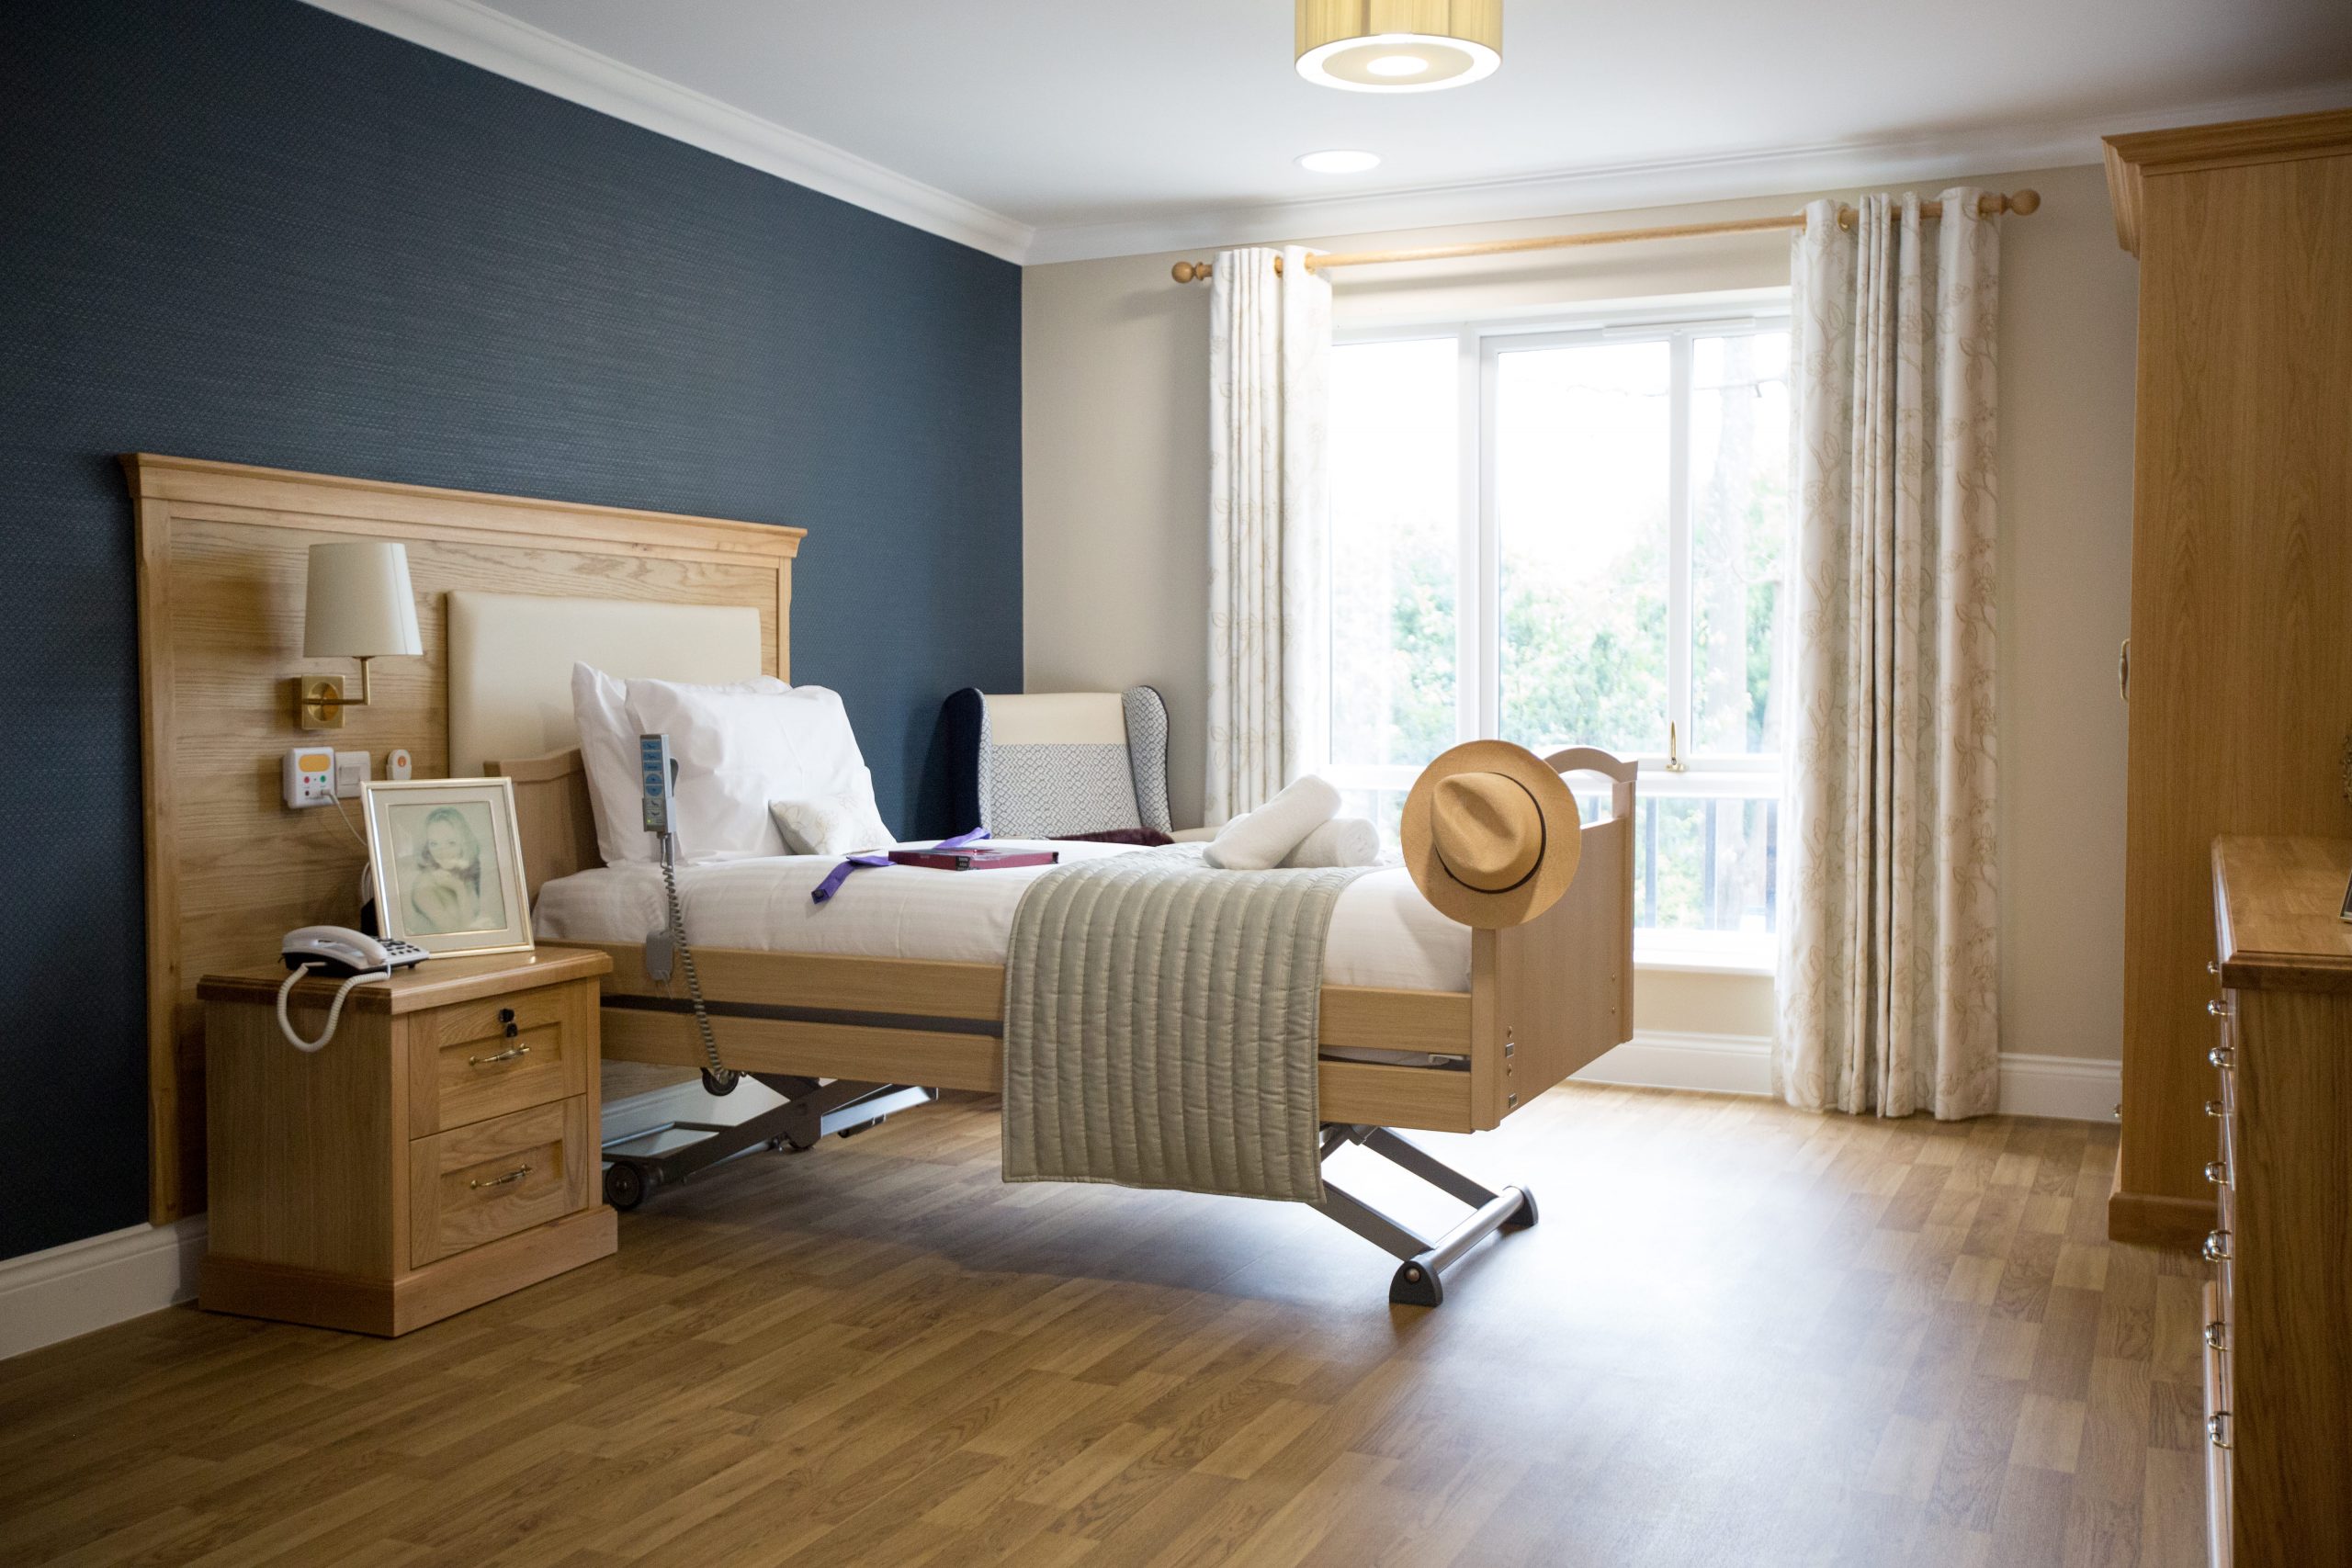 Cuffley Manor Care home in Potters bar Hertfordshire Bedroom Organisation